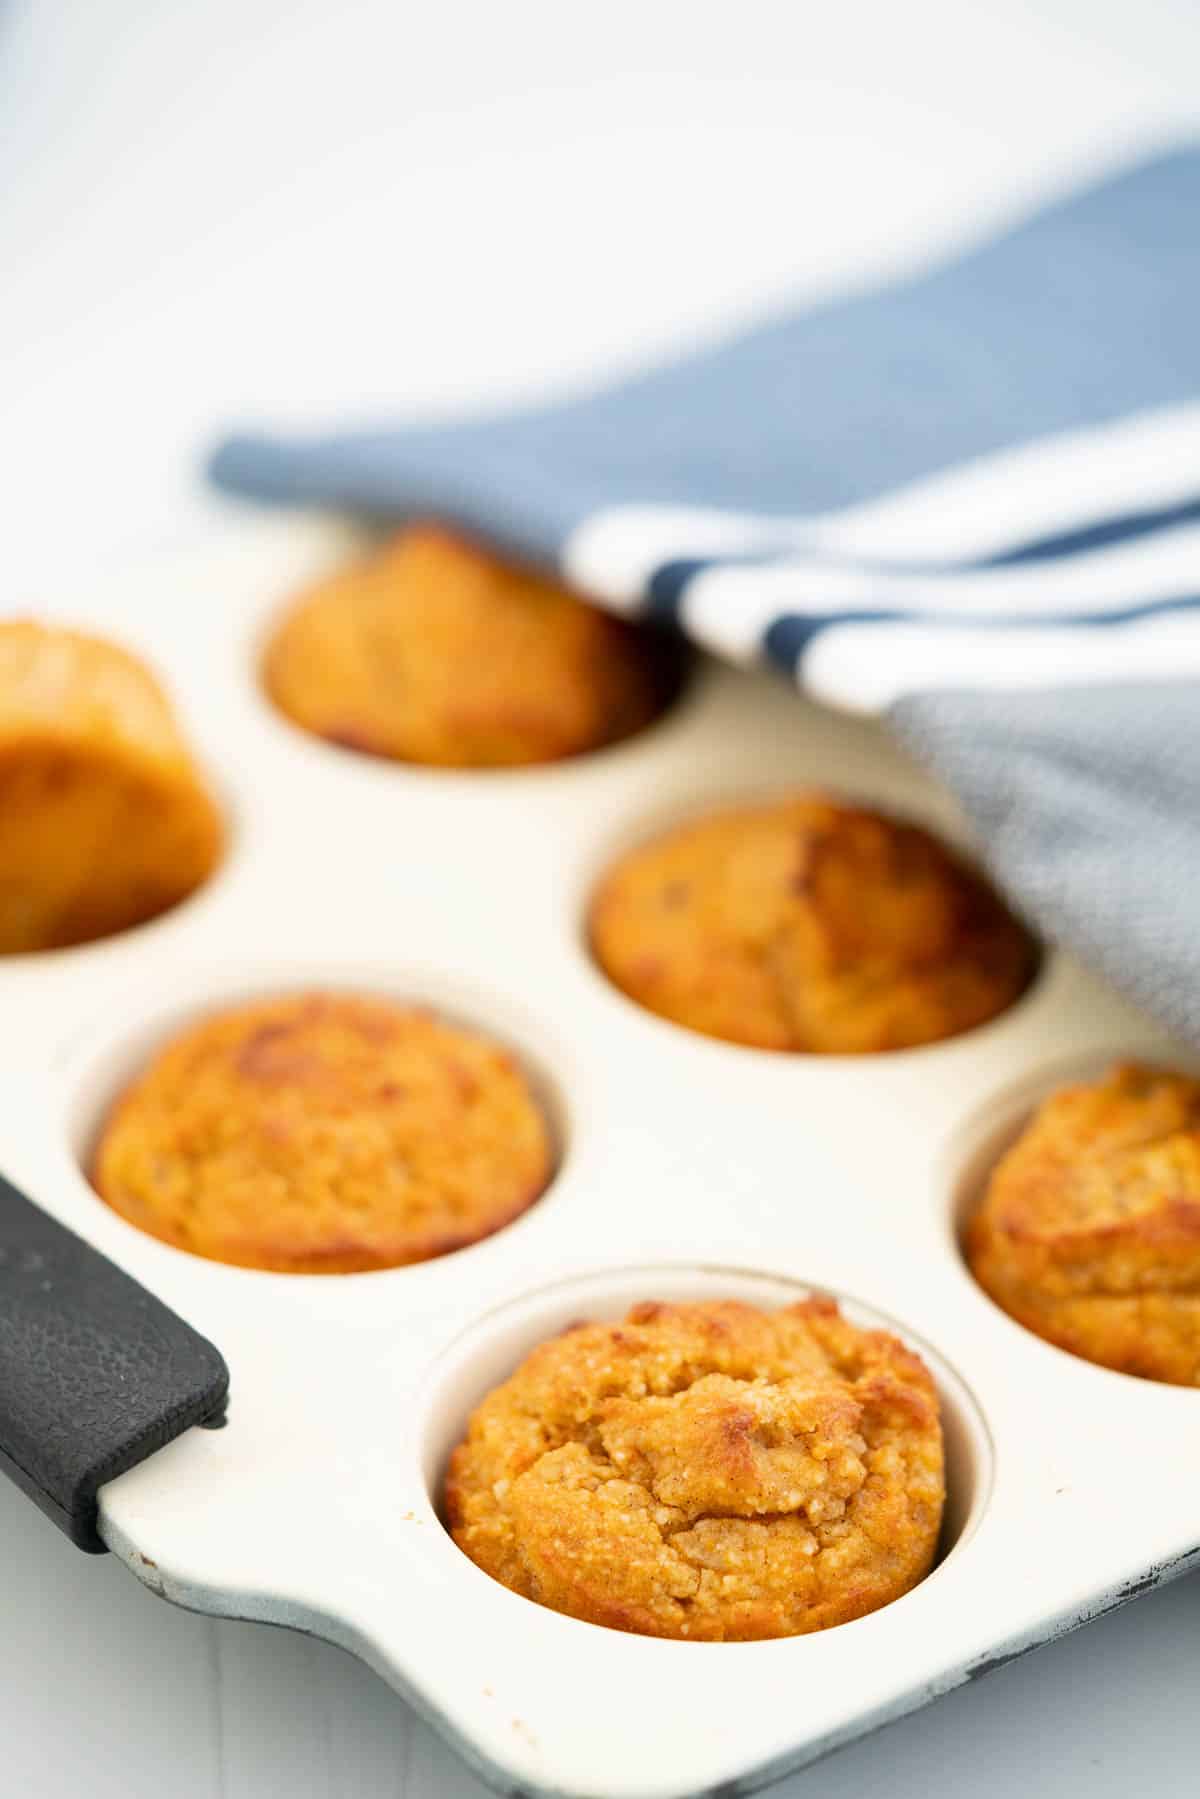 Cooked sweet potato muffins in a cream muffin tray draped with a blue striped cloth.